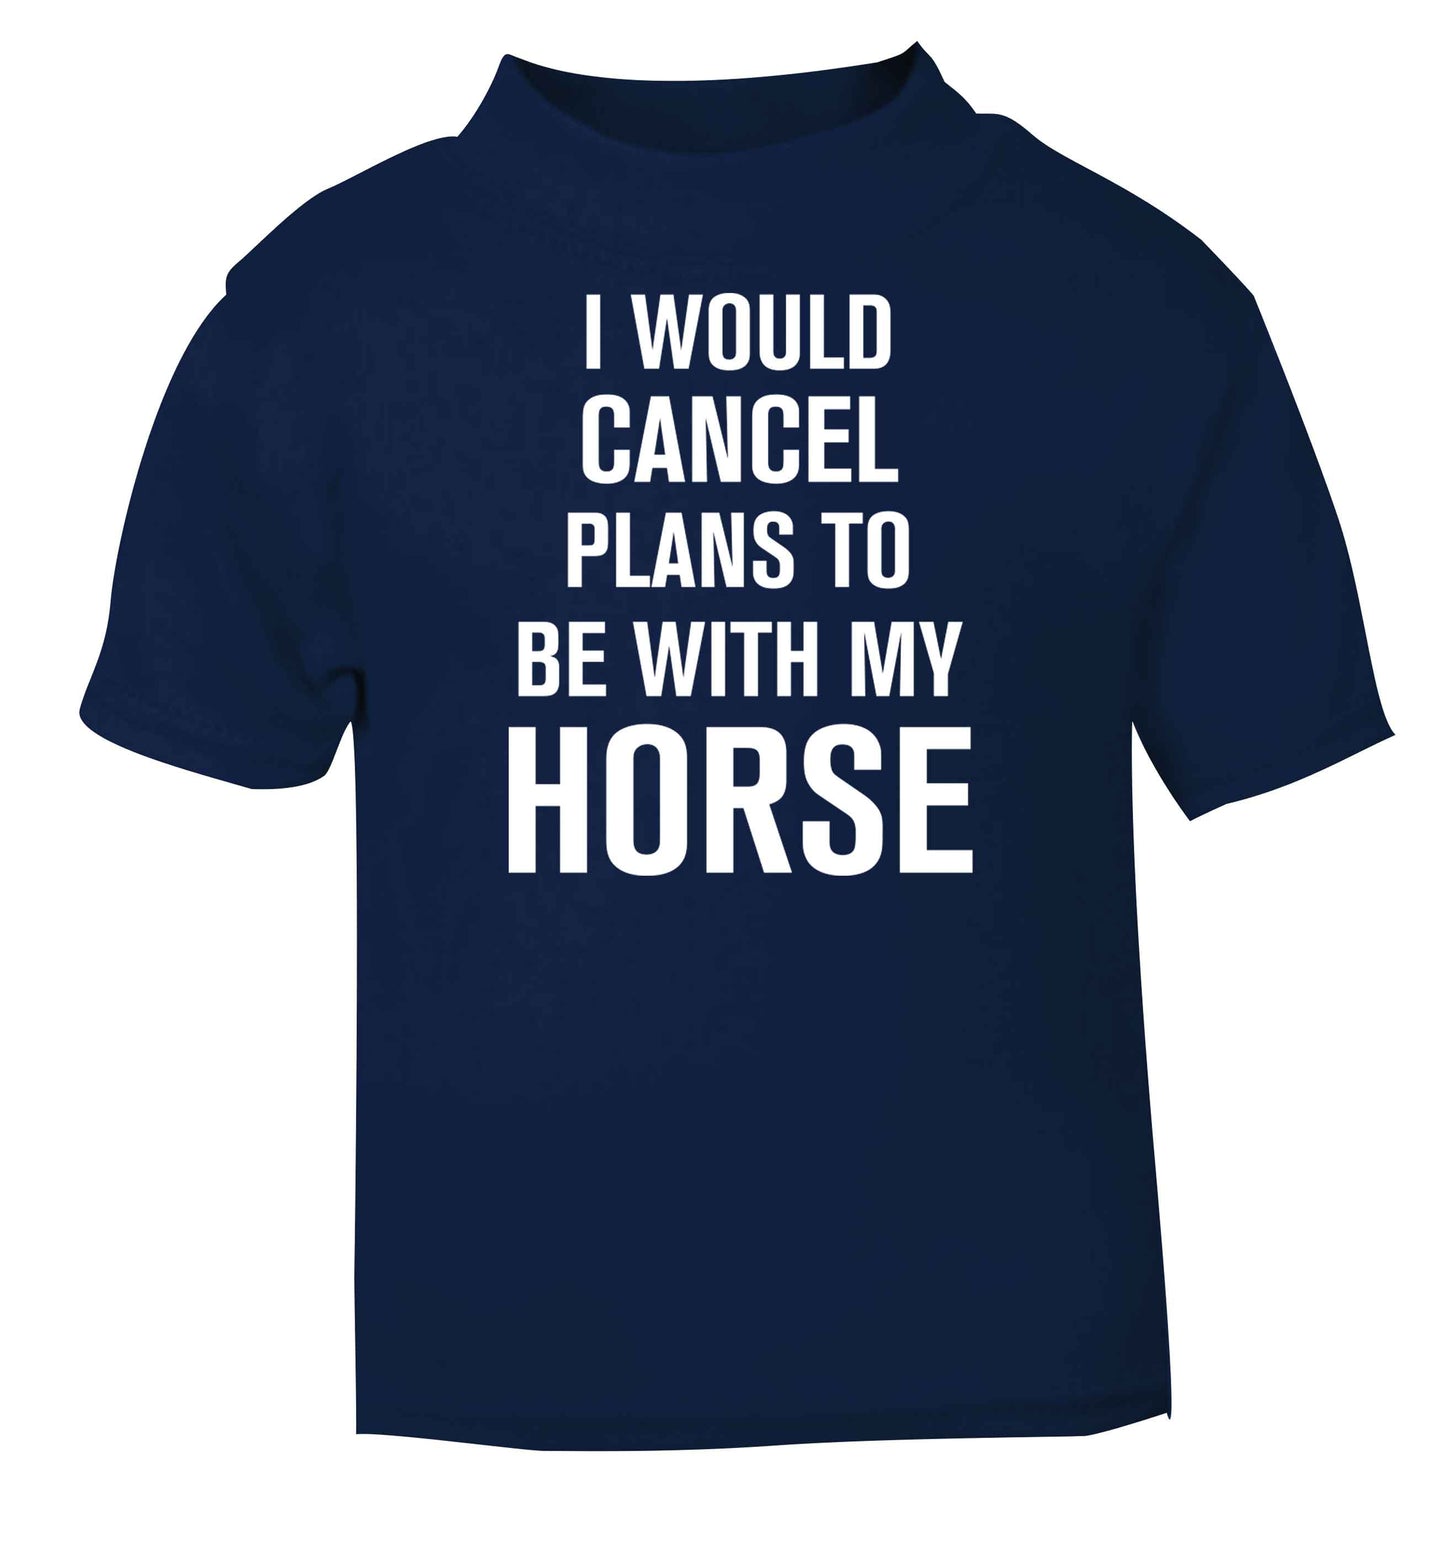 I will cancel plans to be with my horse navy baby toddler Tshirt 2 Years